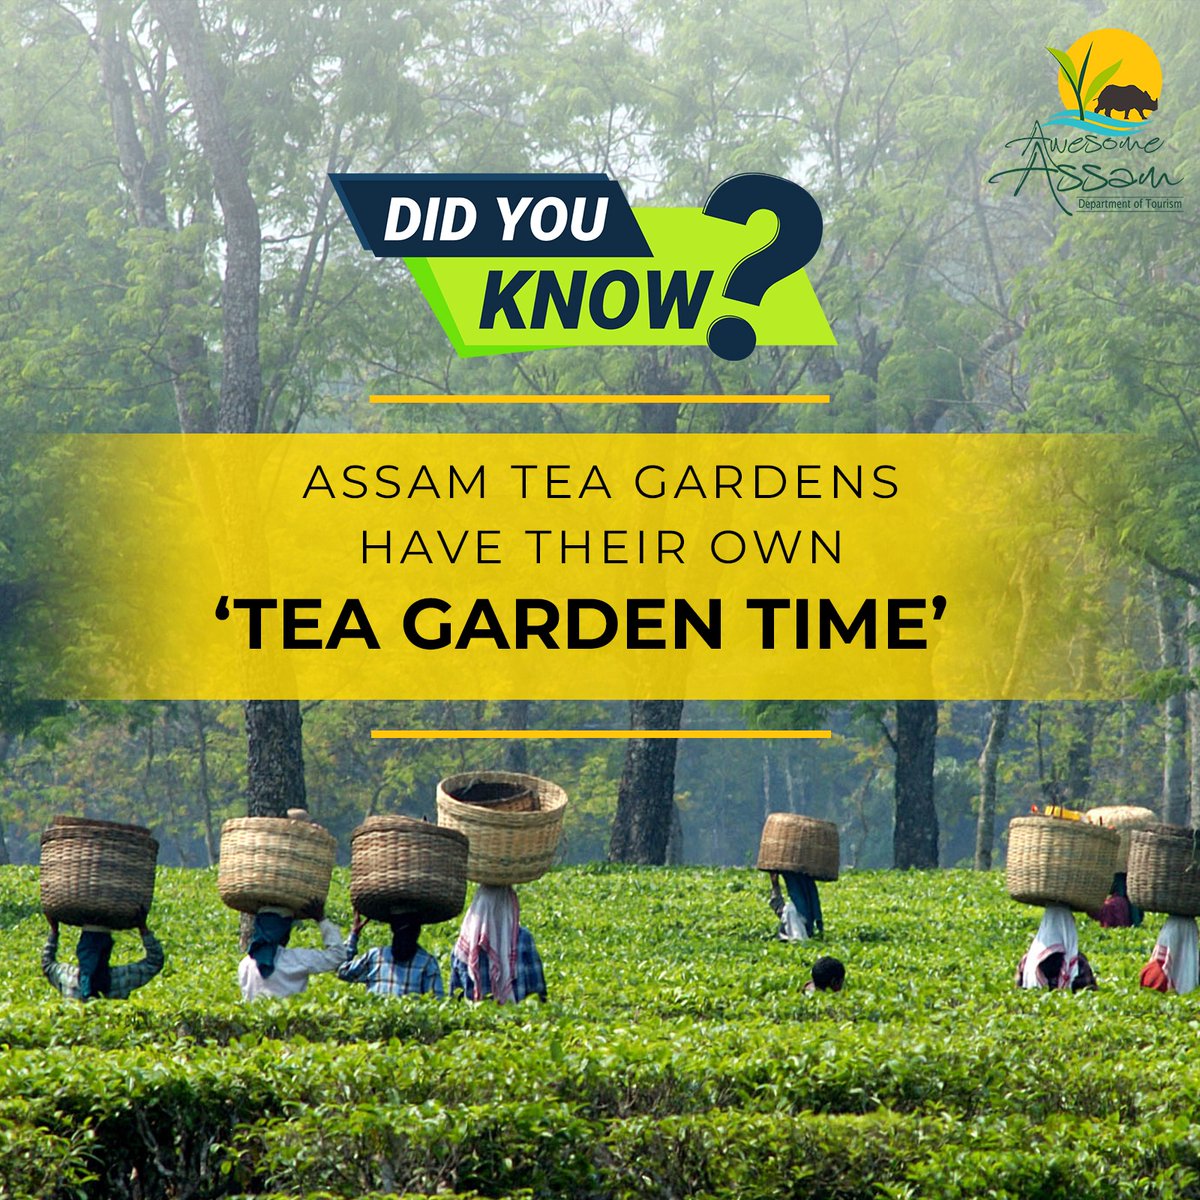 Many tea gardens in Assam still follow the ‘tea garden time’ or ‘bagaan time’ which is an hour ahead of the Indian Standard Time (IST). This system was introduced during the British days, to improve the productivity of tea workers.

#AwesomeAssam #AssamTourism #Assam #VisitAssam